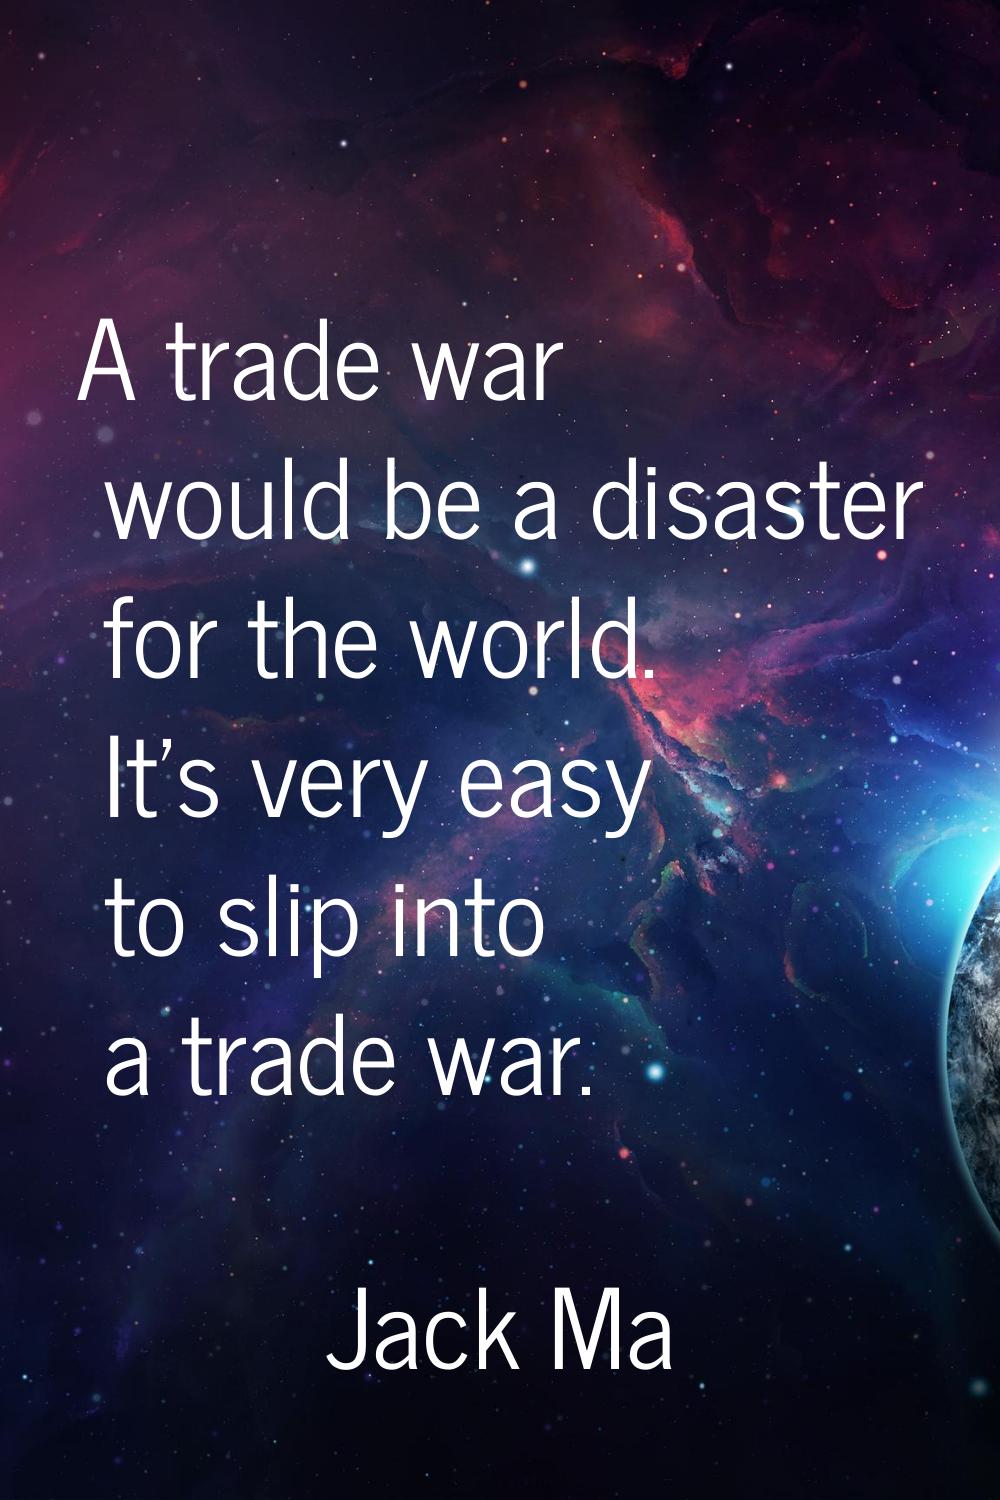 A trade war would be a disaster for the world. It's very easy to slip into a trade war.